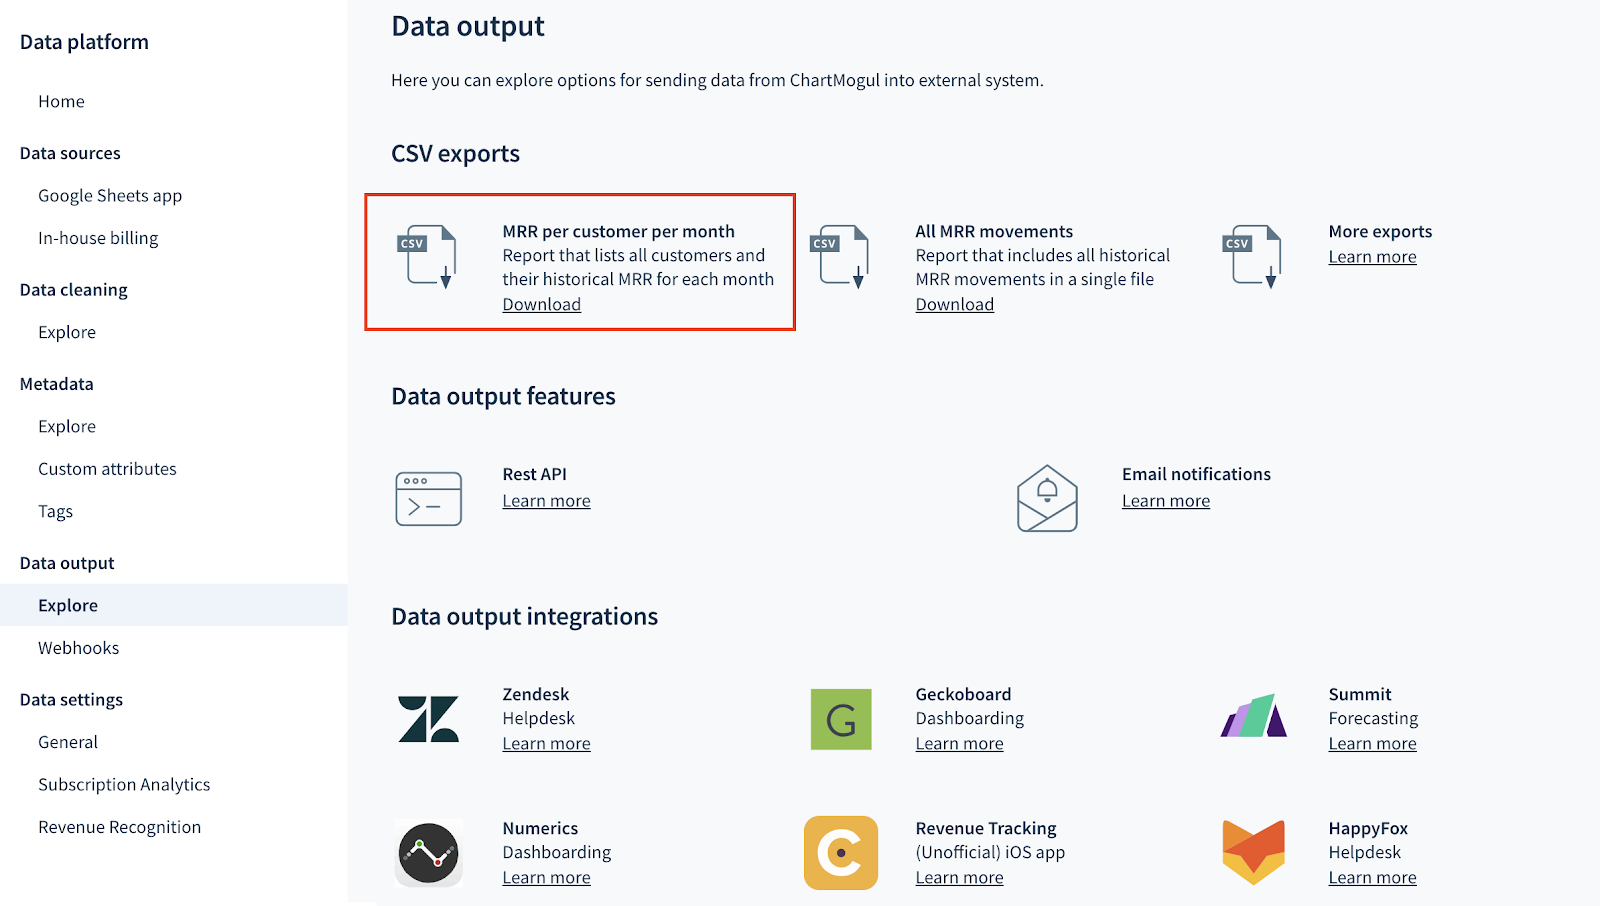 A full export of "MRR per customer per month" is available from the Data platform section in the ChartMogul app.